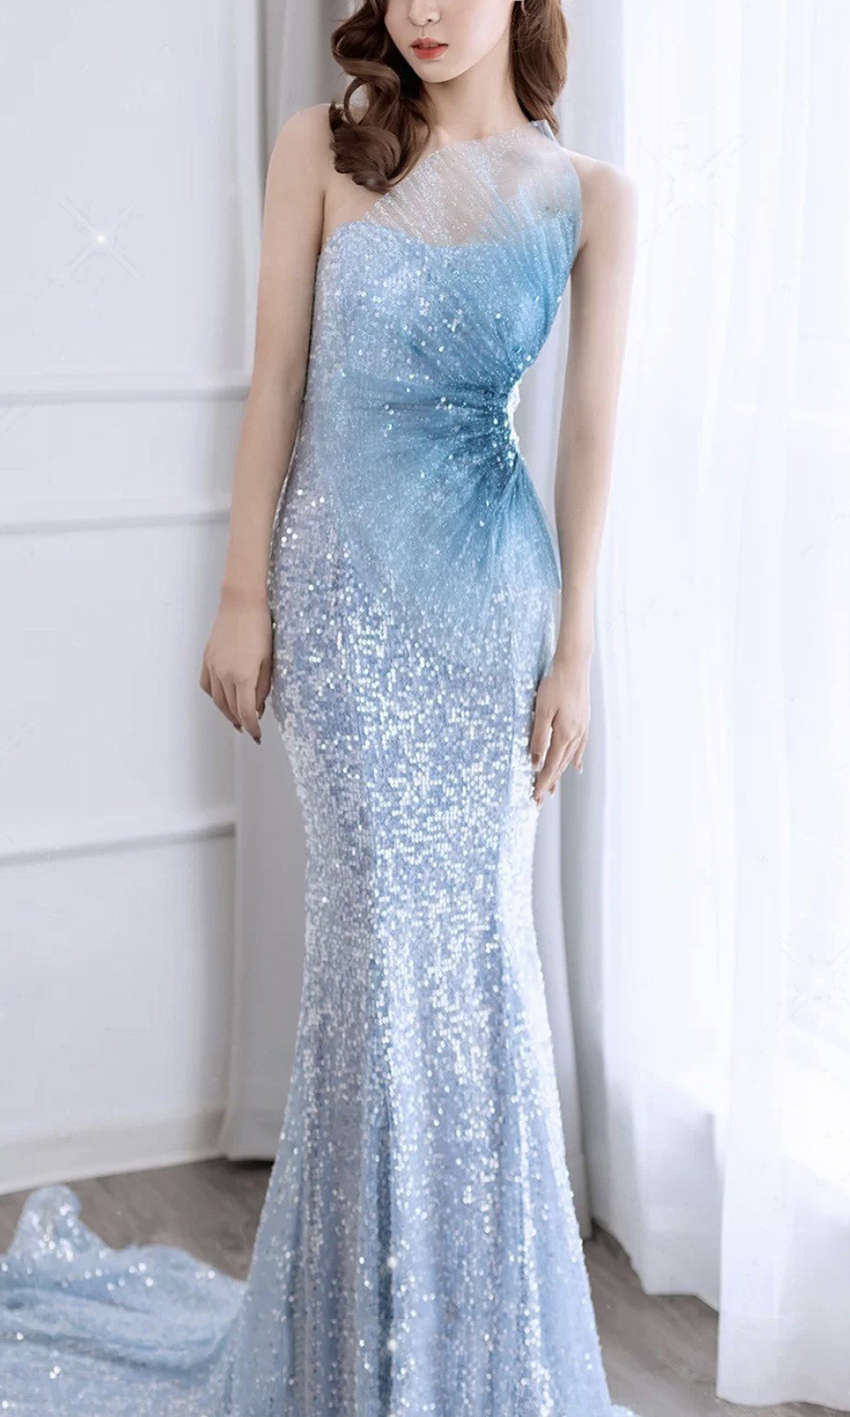 Find Perfect Prom Dresses Flatter Your Figure – Yuan's fashion and beauty  choice